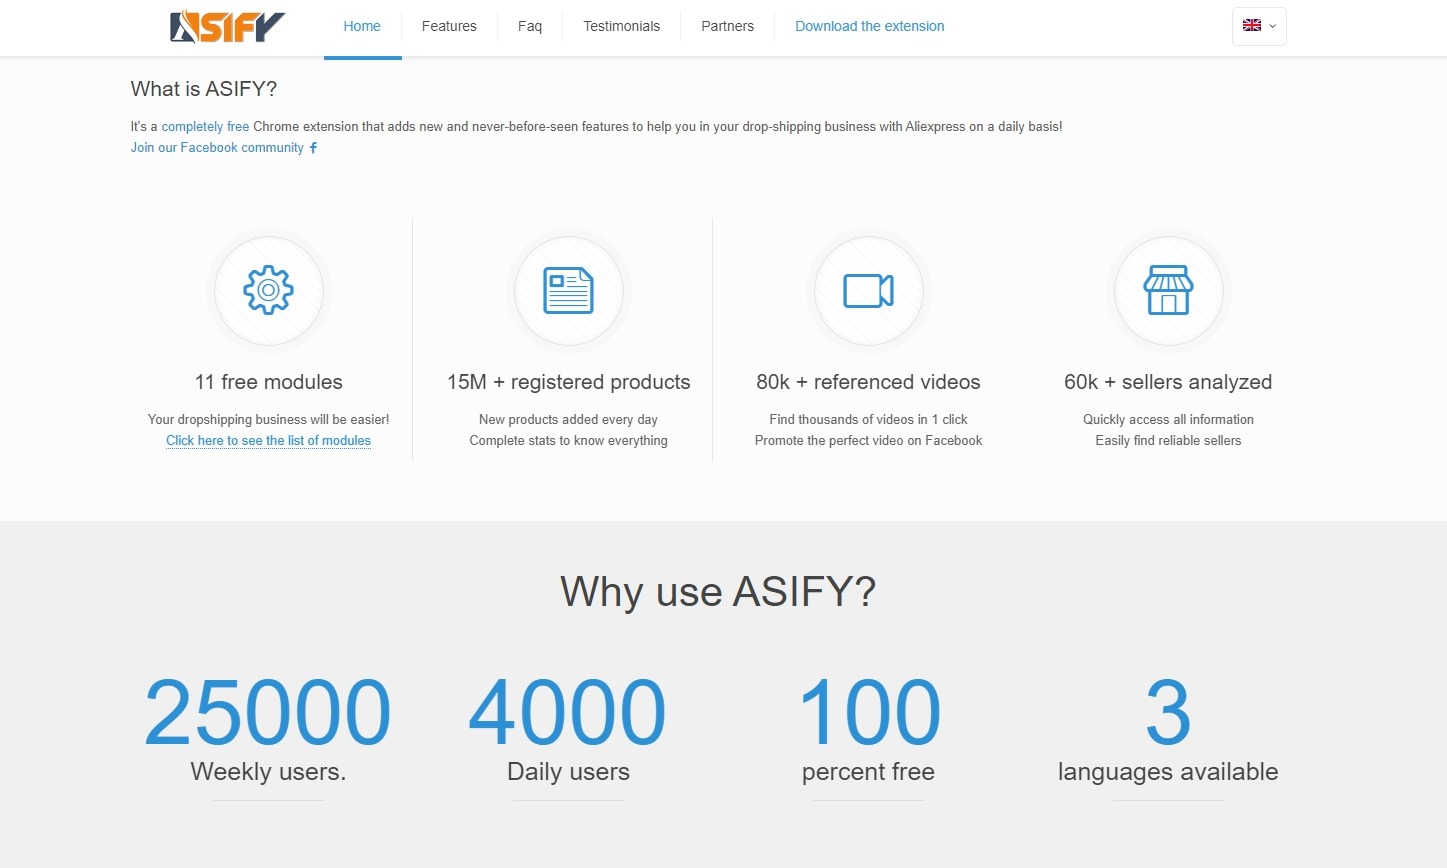 Asify is a free Chrome extension